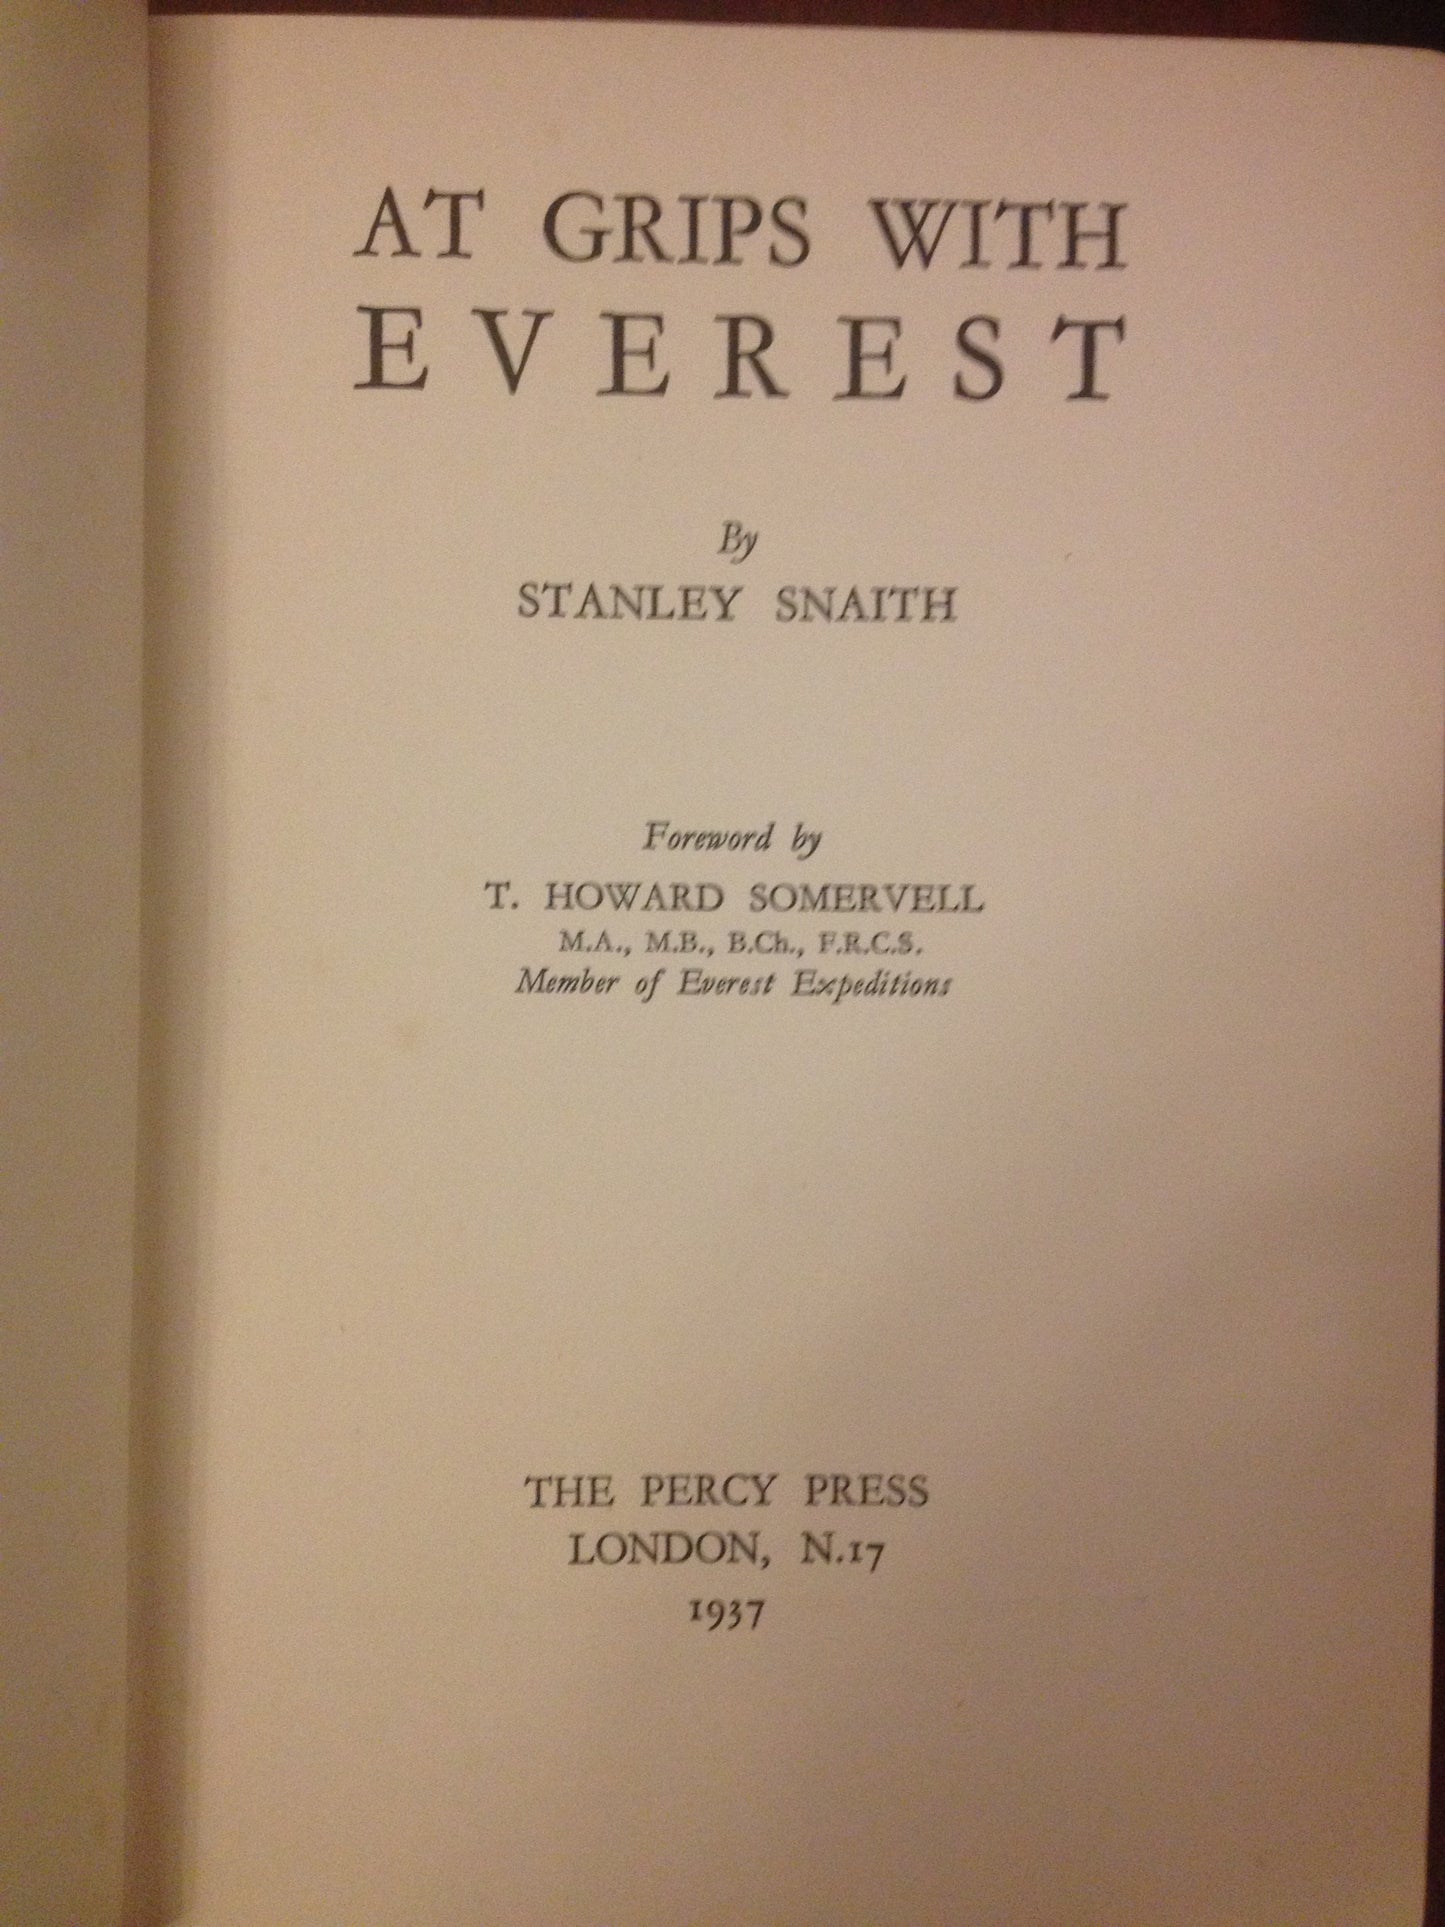 AT GRIPS WITH EVEREST - STANLEY SNAITH